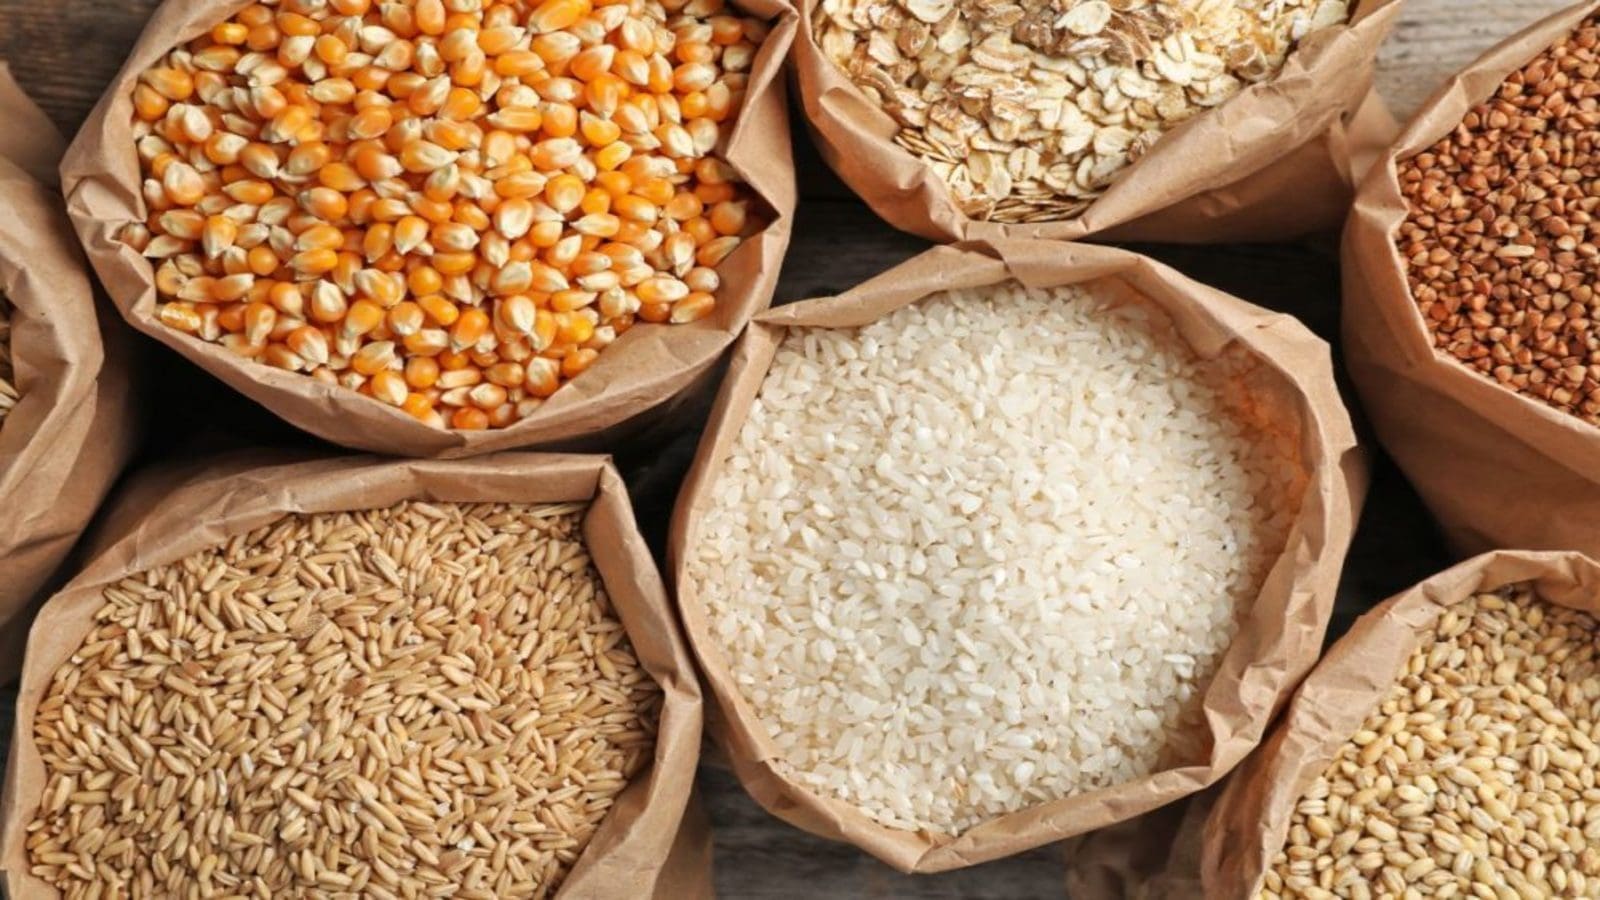 China enacts new food security law to boost grain production